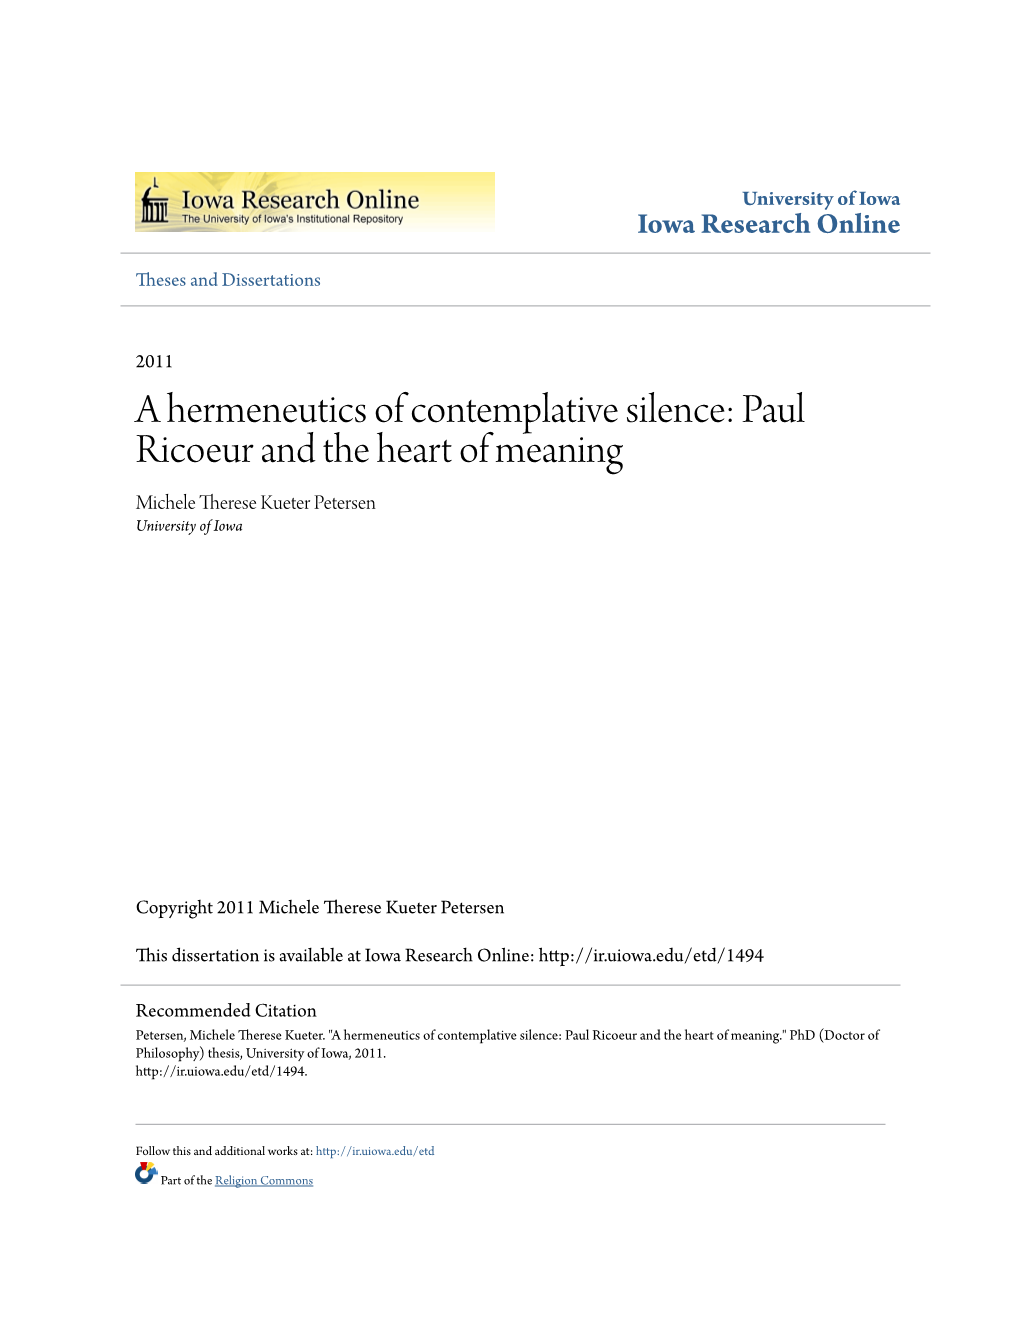 A Hermeneutics of Contemplative Silence: Paul Ricoeur and the Heart of Meaning Michele Therese Kueter Petersen University of Iowa